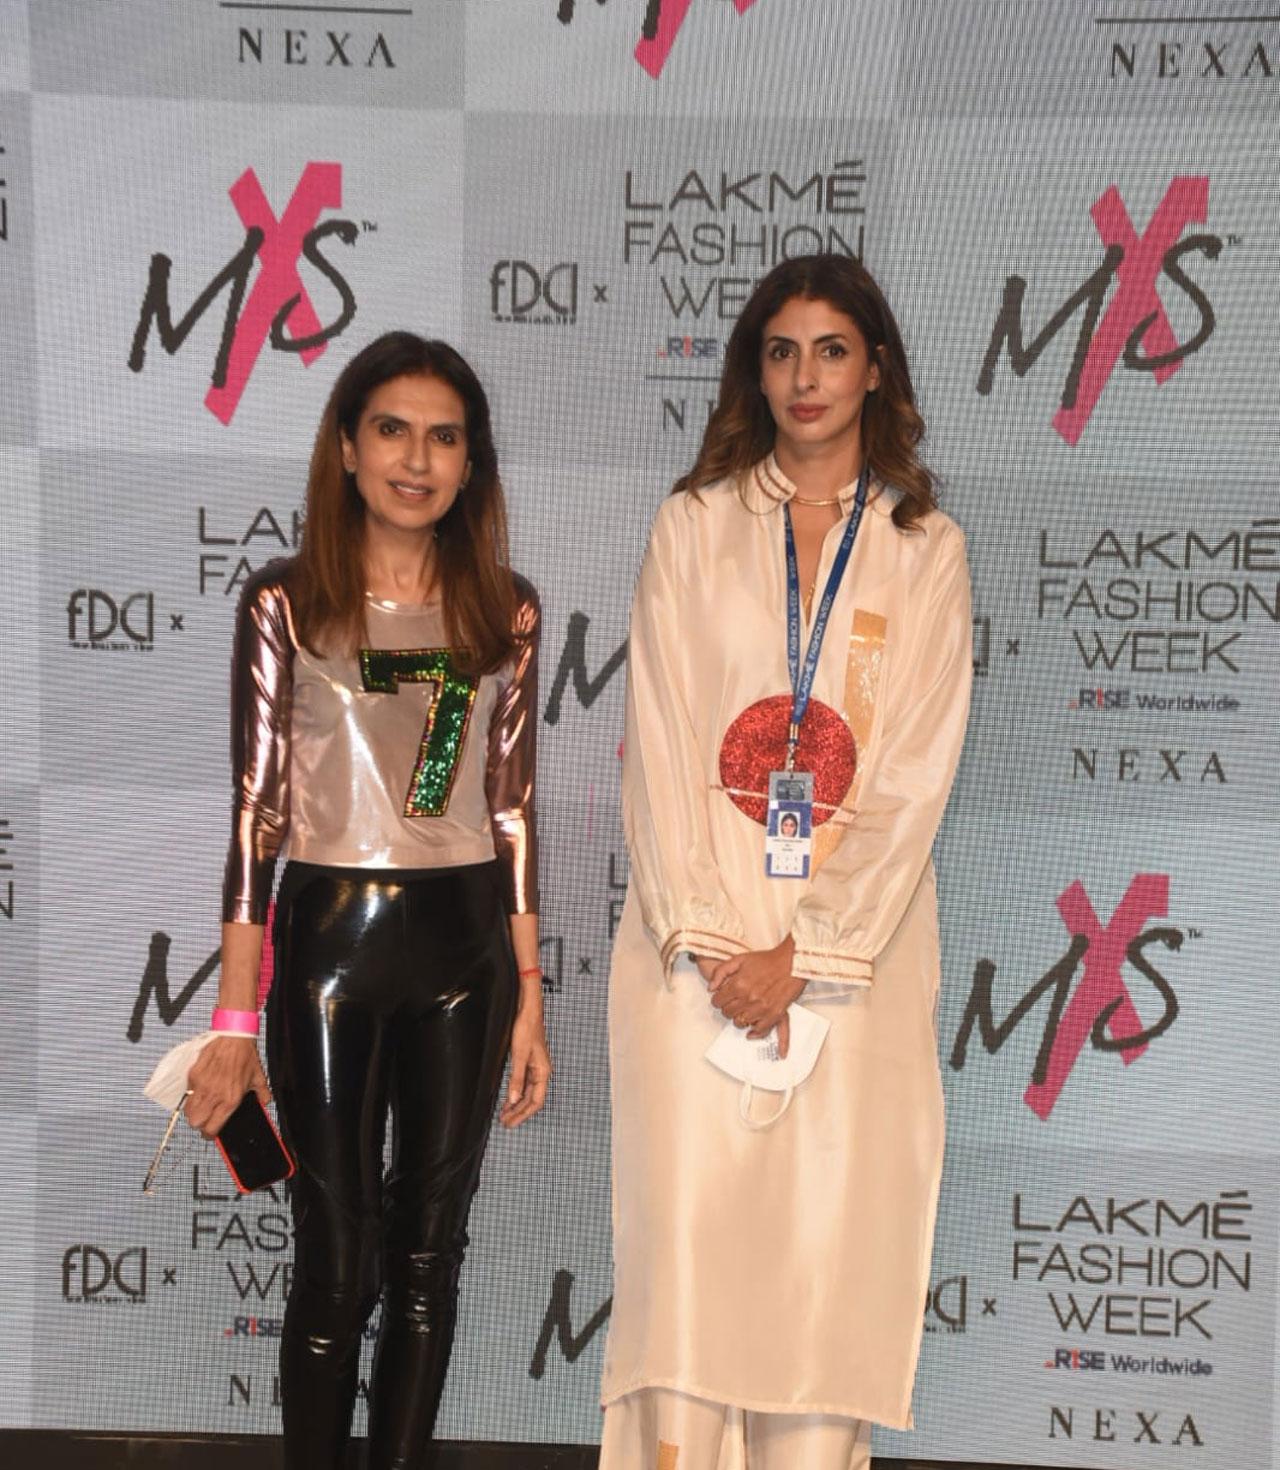 Ace fashion designer Monisha Jaising and Shweta Bachchan Nanda struck a stylish pose together at the first day of the 2021 Lakme Fashion Week. Needless to say, both the ladies were looking stylish and elegant.